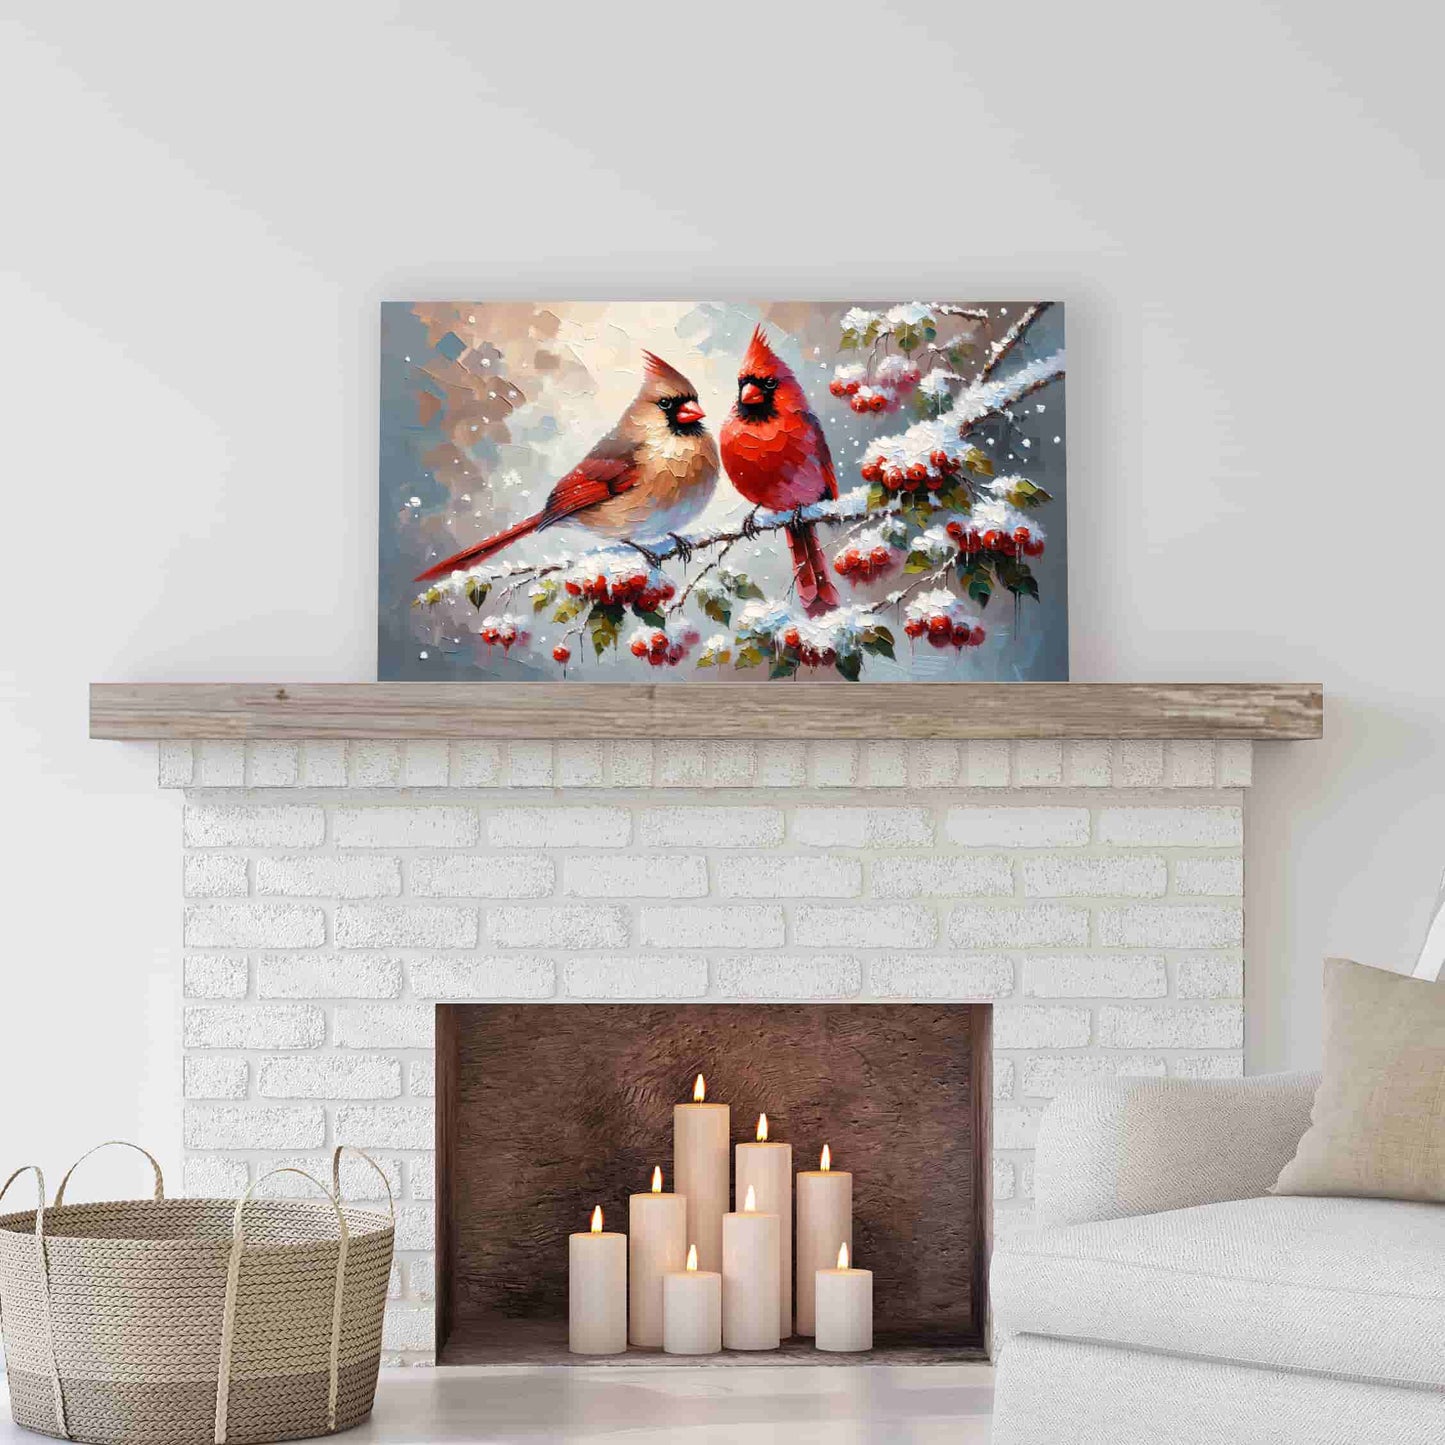 "Whispering Winter's Song - Cardinal Pair on Snow-Dusted Berries" Wrapped Canvas Wall art prints